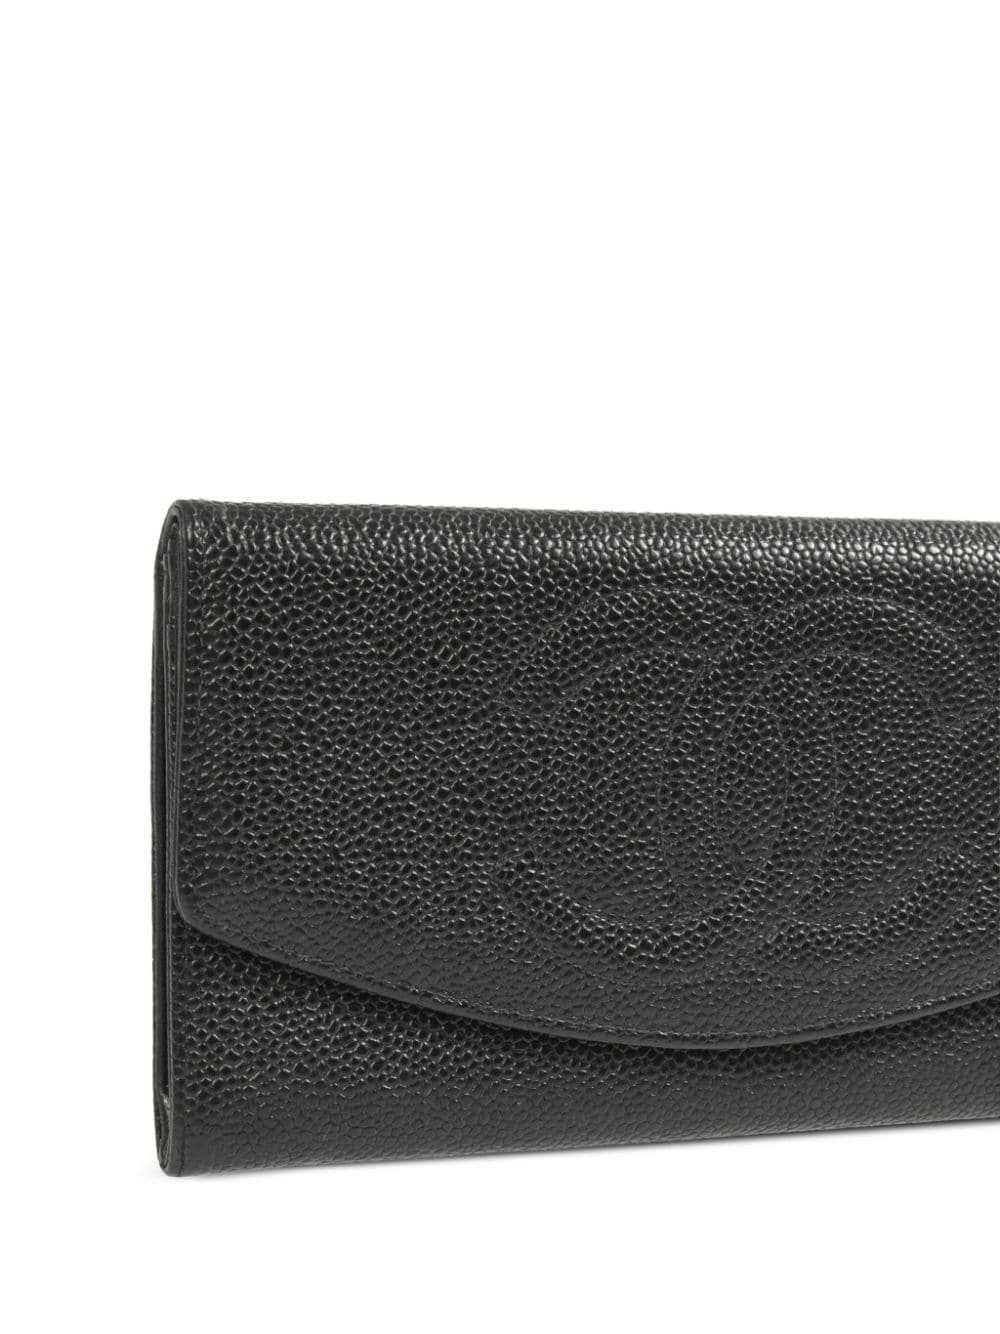 CHANEL Pre-Owned 1998 long flap wallet - Black - image 3